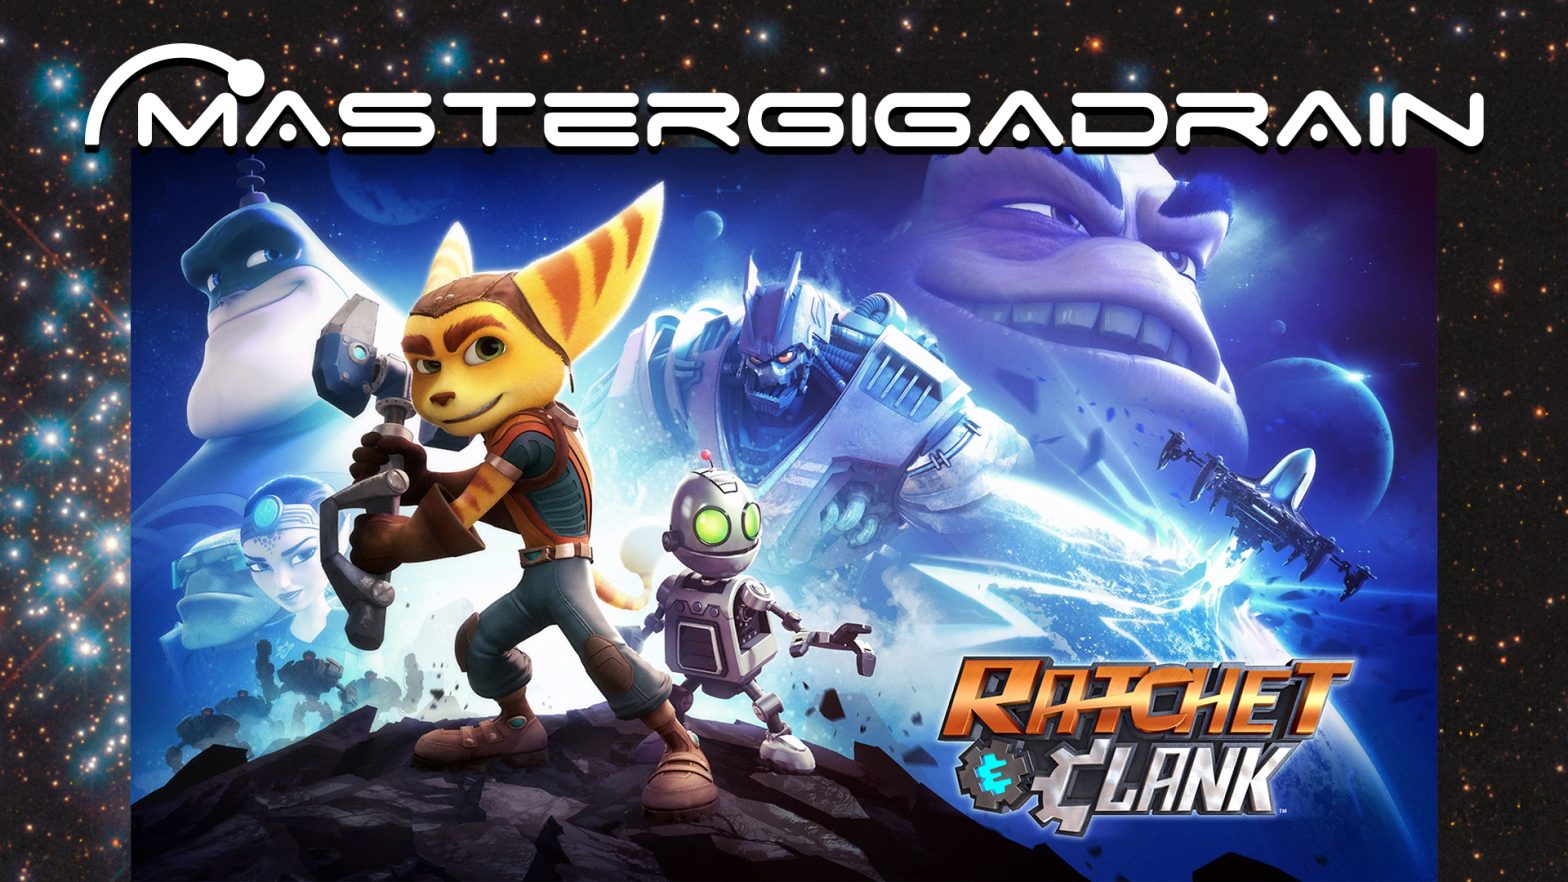 Starting a new series | Ratchet & Clank (PS4)